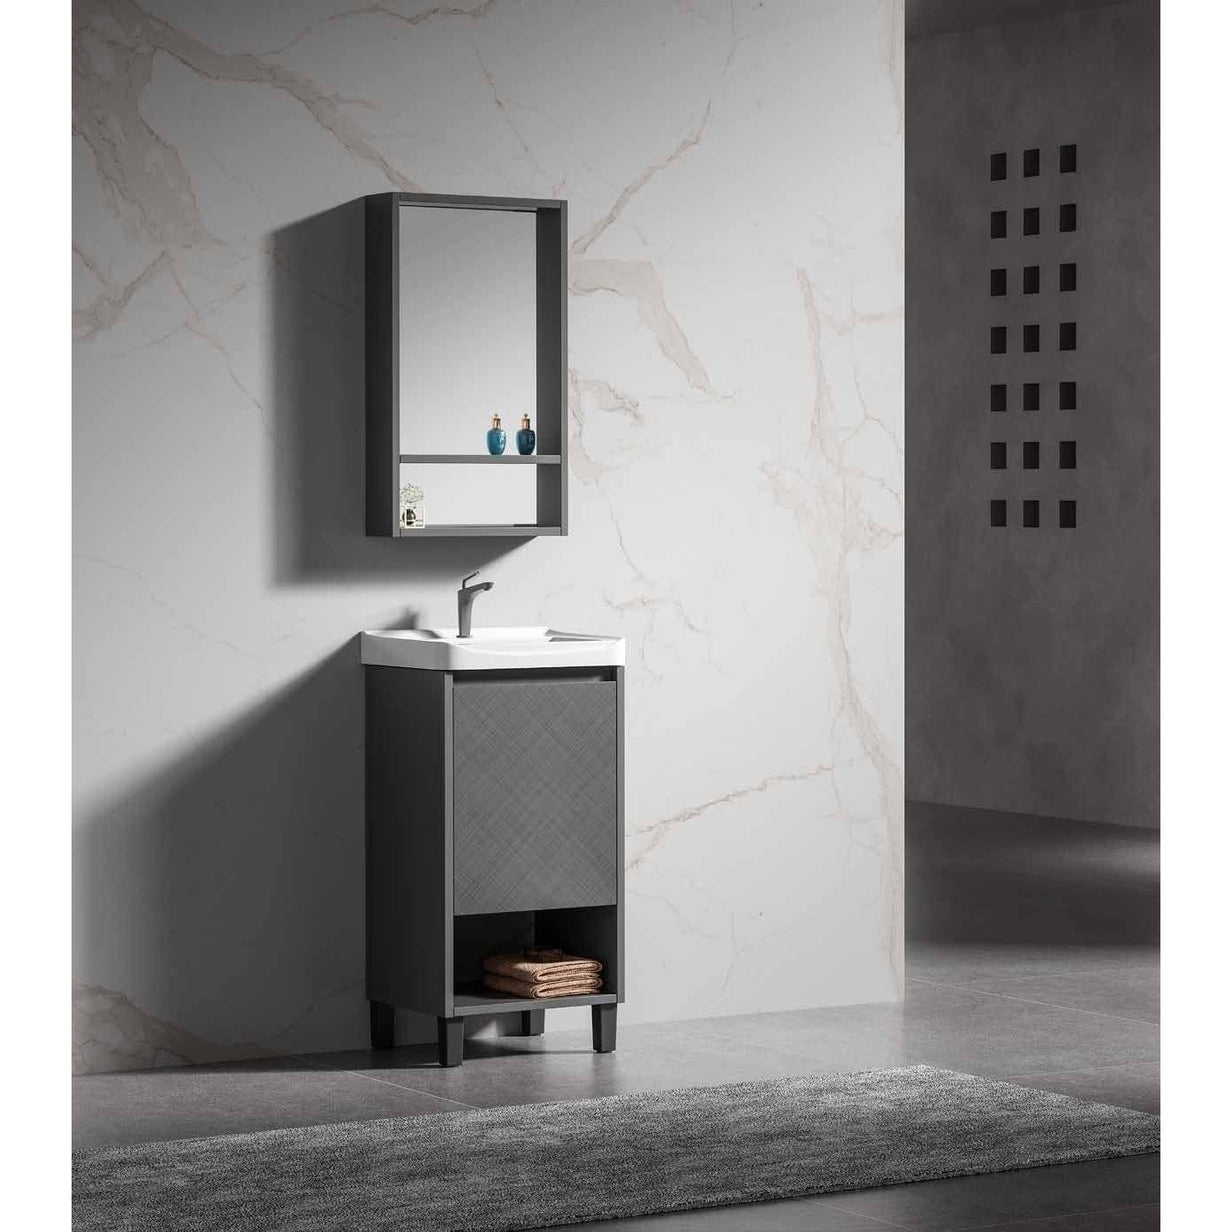 Buy Bathroom Luxury 43cm Wall-Mounted Vanity Cabinet with Mirror - WK-K-9064 | Shop at Supply Master Accra, Ghana Bathroom Vanity & Cabinets Buy Tools hardware Building materials